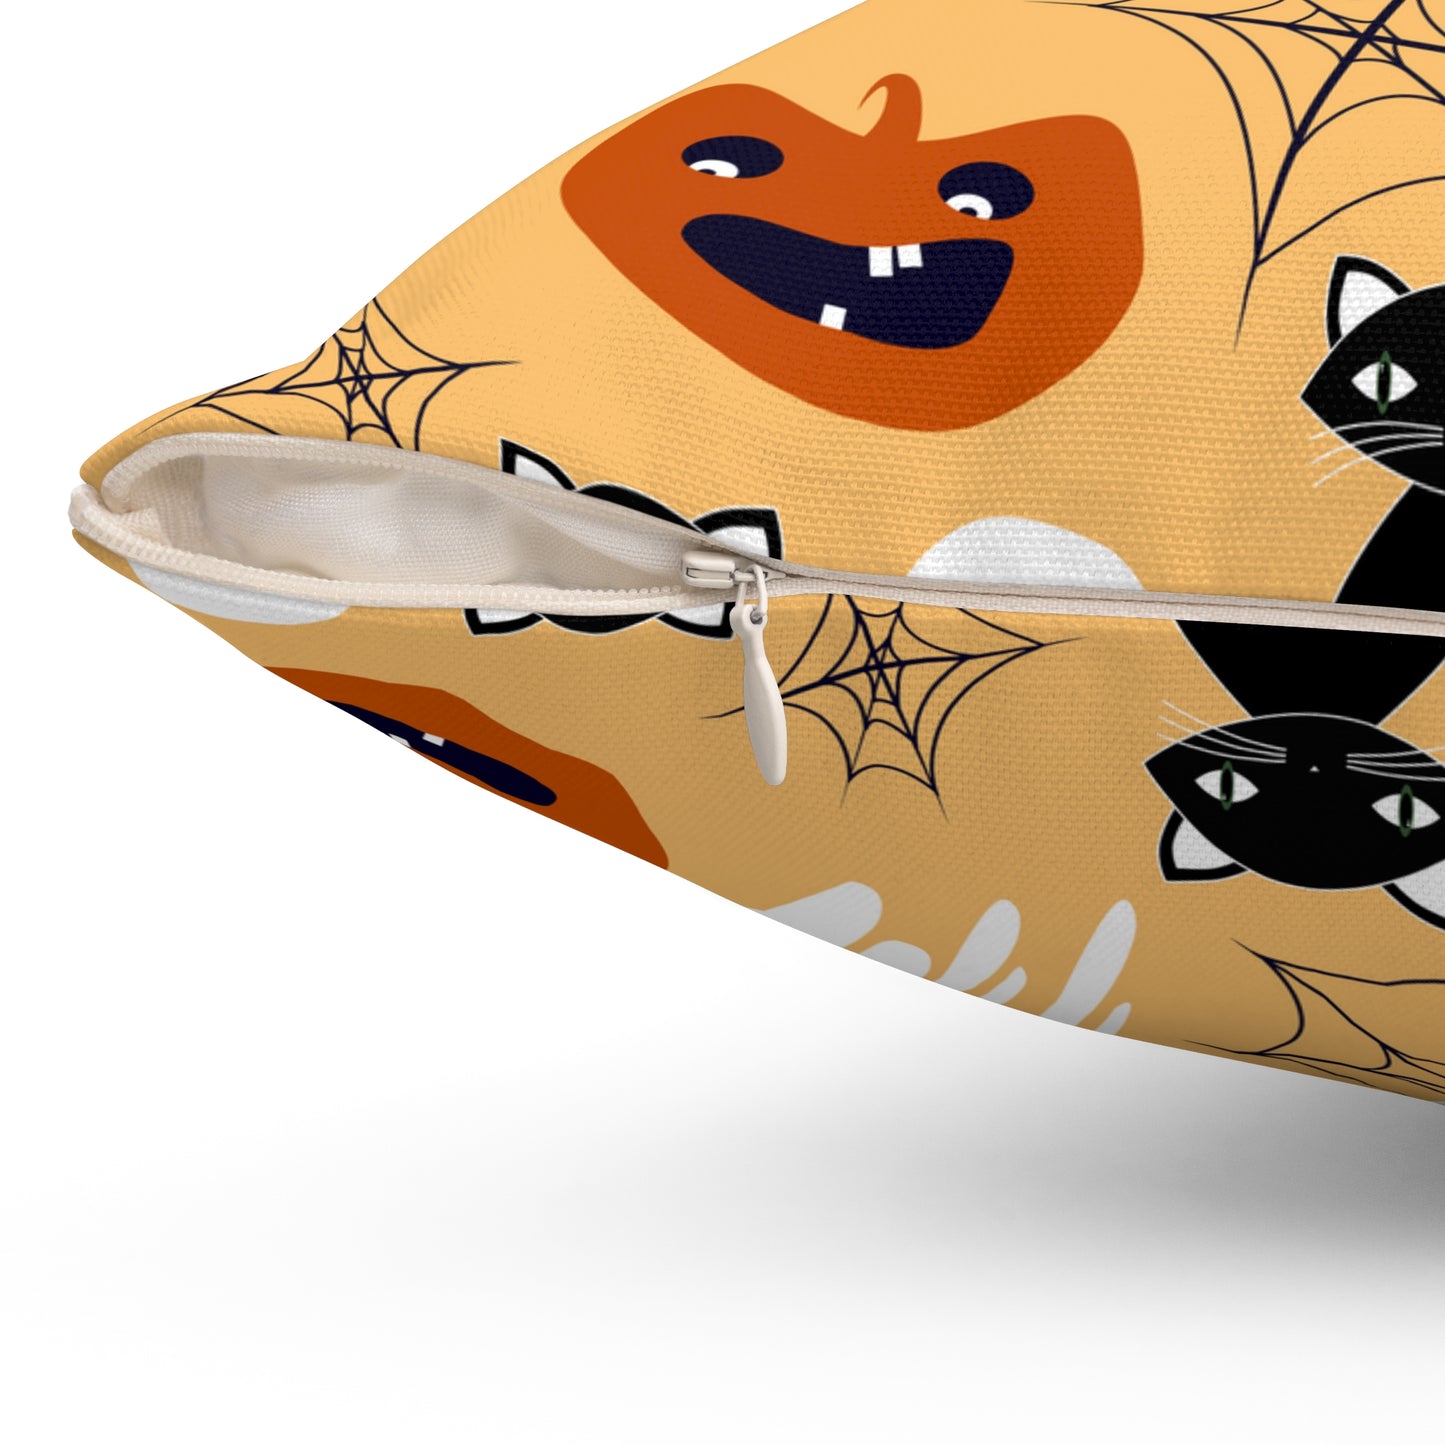 Halloween Cats and Ghosts Spun Polyester Square Pillow